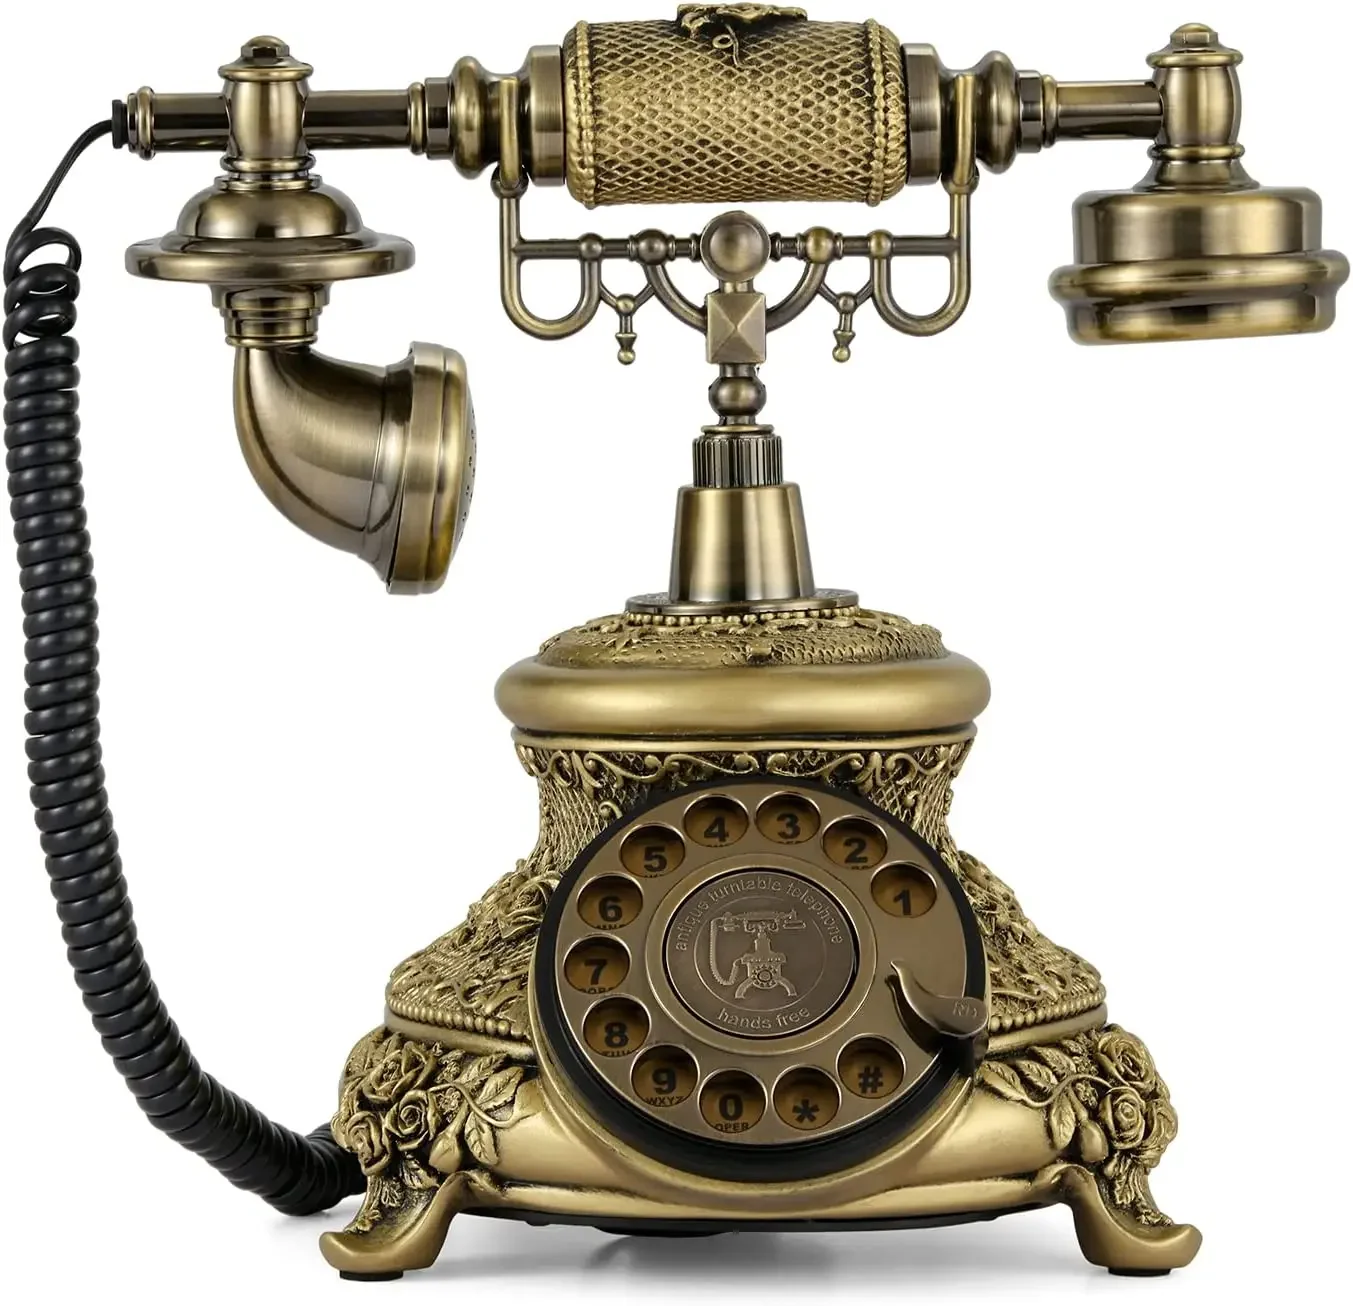 

Vintage Phone Antique Rotary Dial Telephone Retro Landline Telephones Decor Old Fashioned Antique Phone for Home Hotel Office